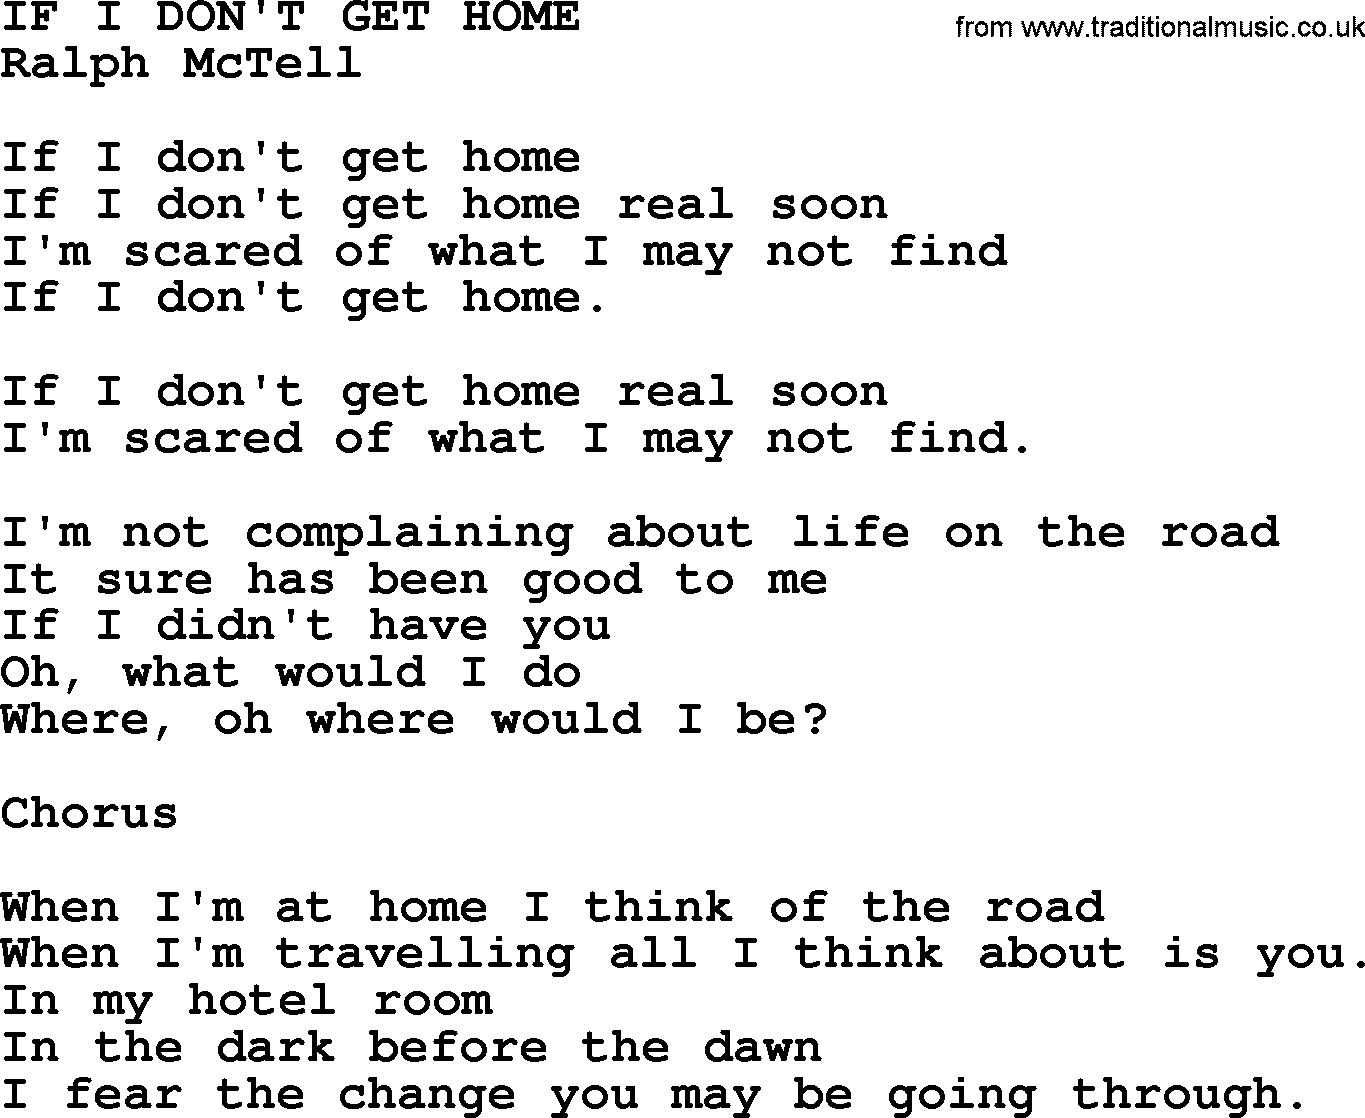 Ralph McTell Song: If I Don't Get Home, lyrics